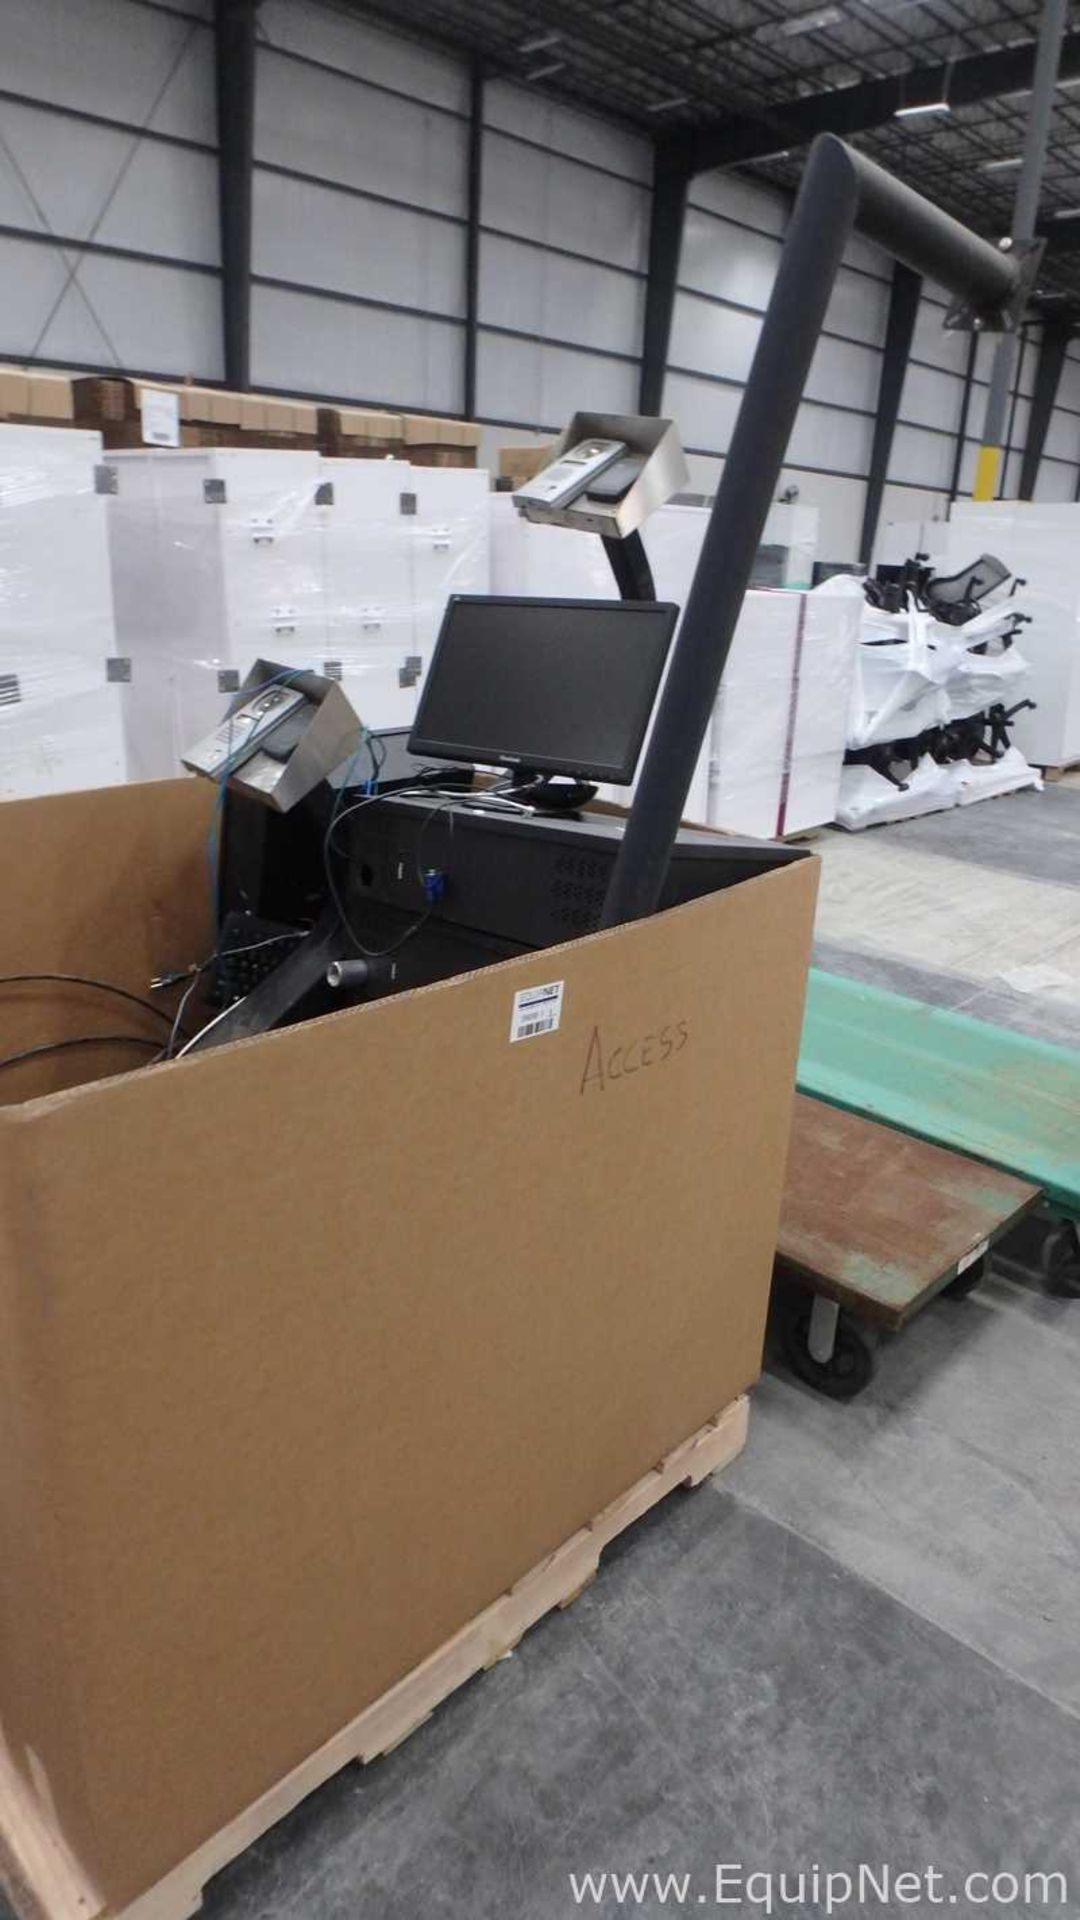 Lot of 1 Pallets With DSX Access Systems Gate Access Control System - Image 5 of 8